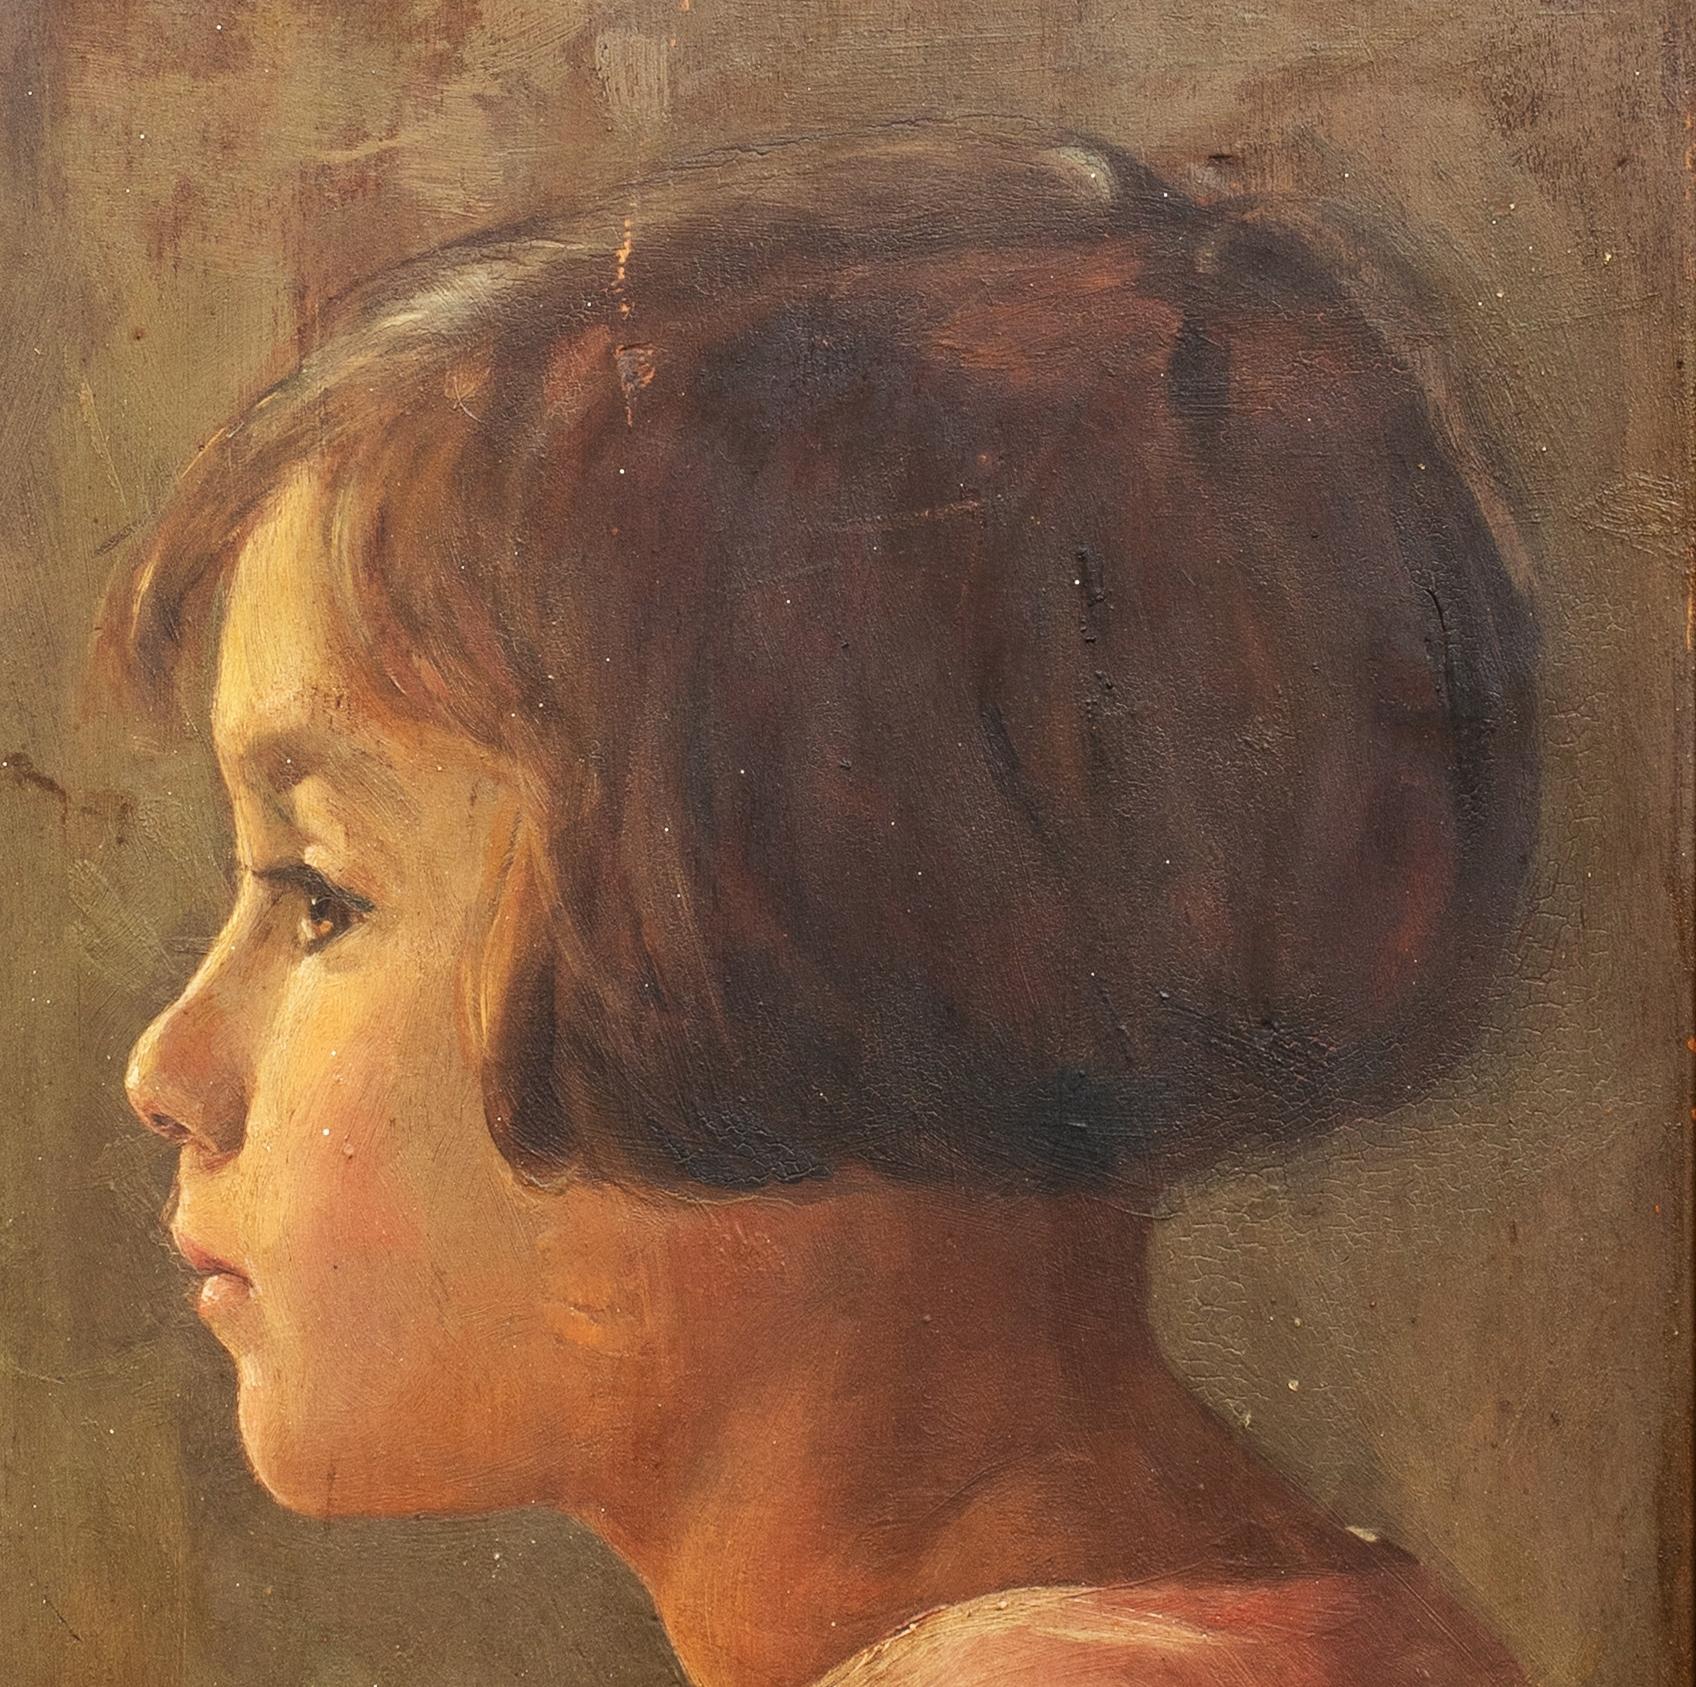 Portrait Of A Girl, dated 1931 - Exhibited At The Royal Academy  - Brown Portrait Painting by Reginald Edgar James Bush 